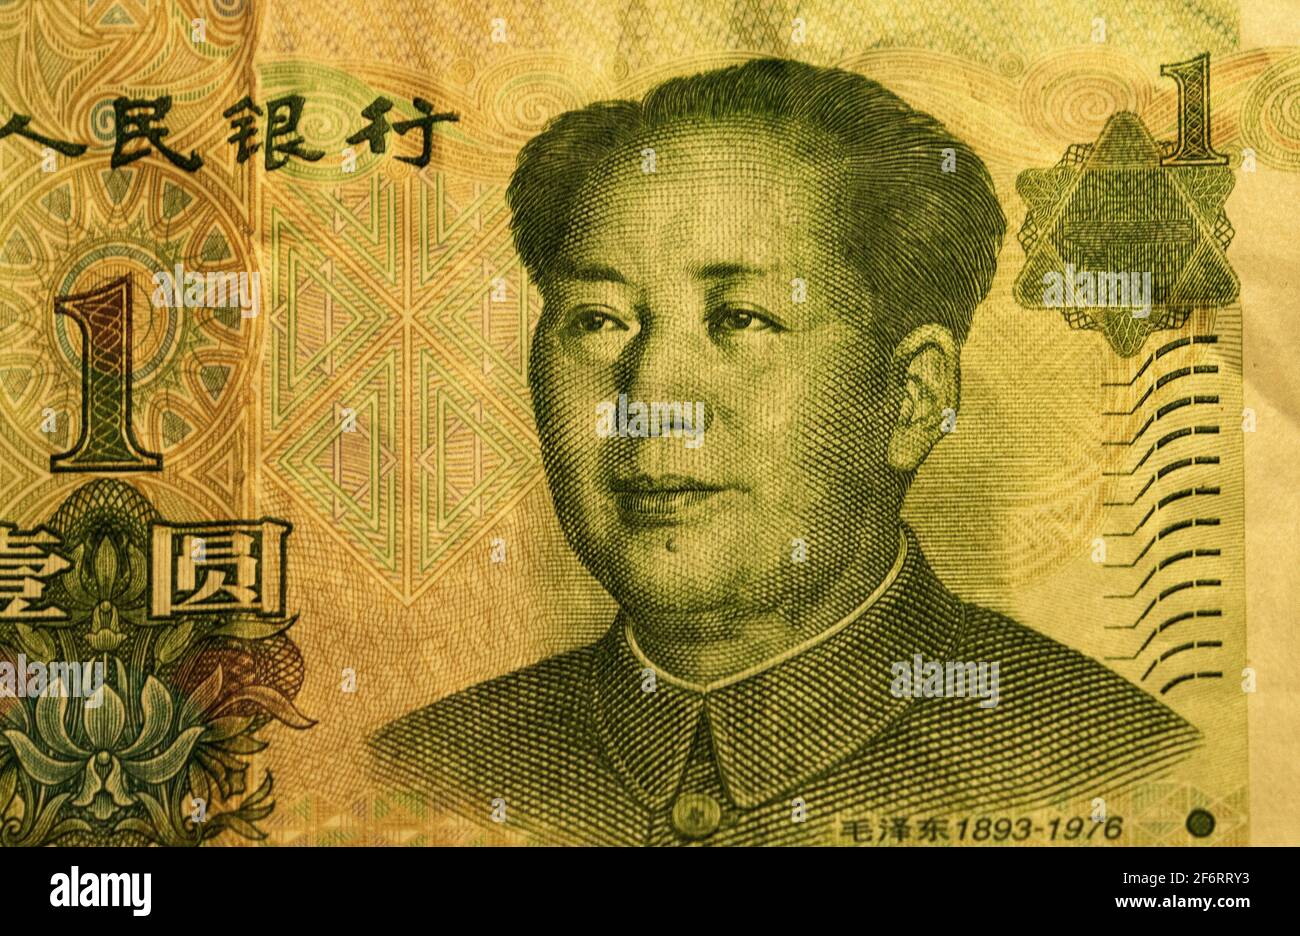 China, portrait of Mao Zedong on a banknote. Mao Zedong (1893-1976), also known as Chairman Mao, was a Chinese communist revolutionary who became the Stock Photo